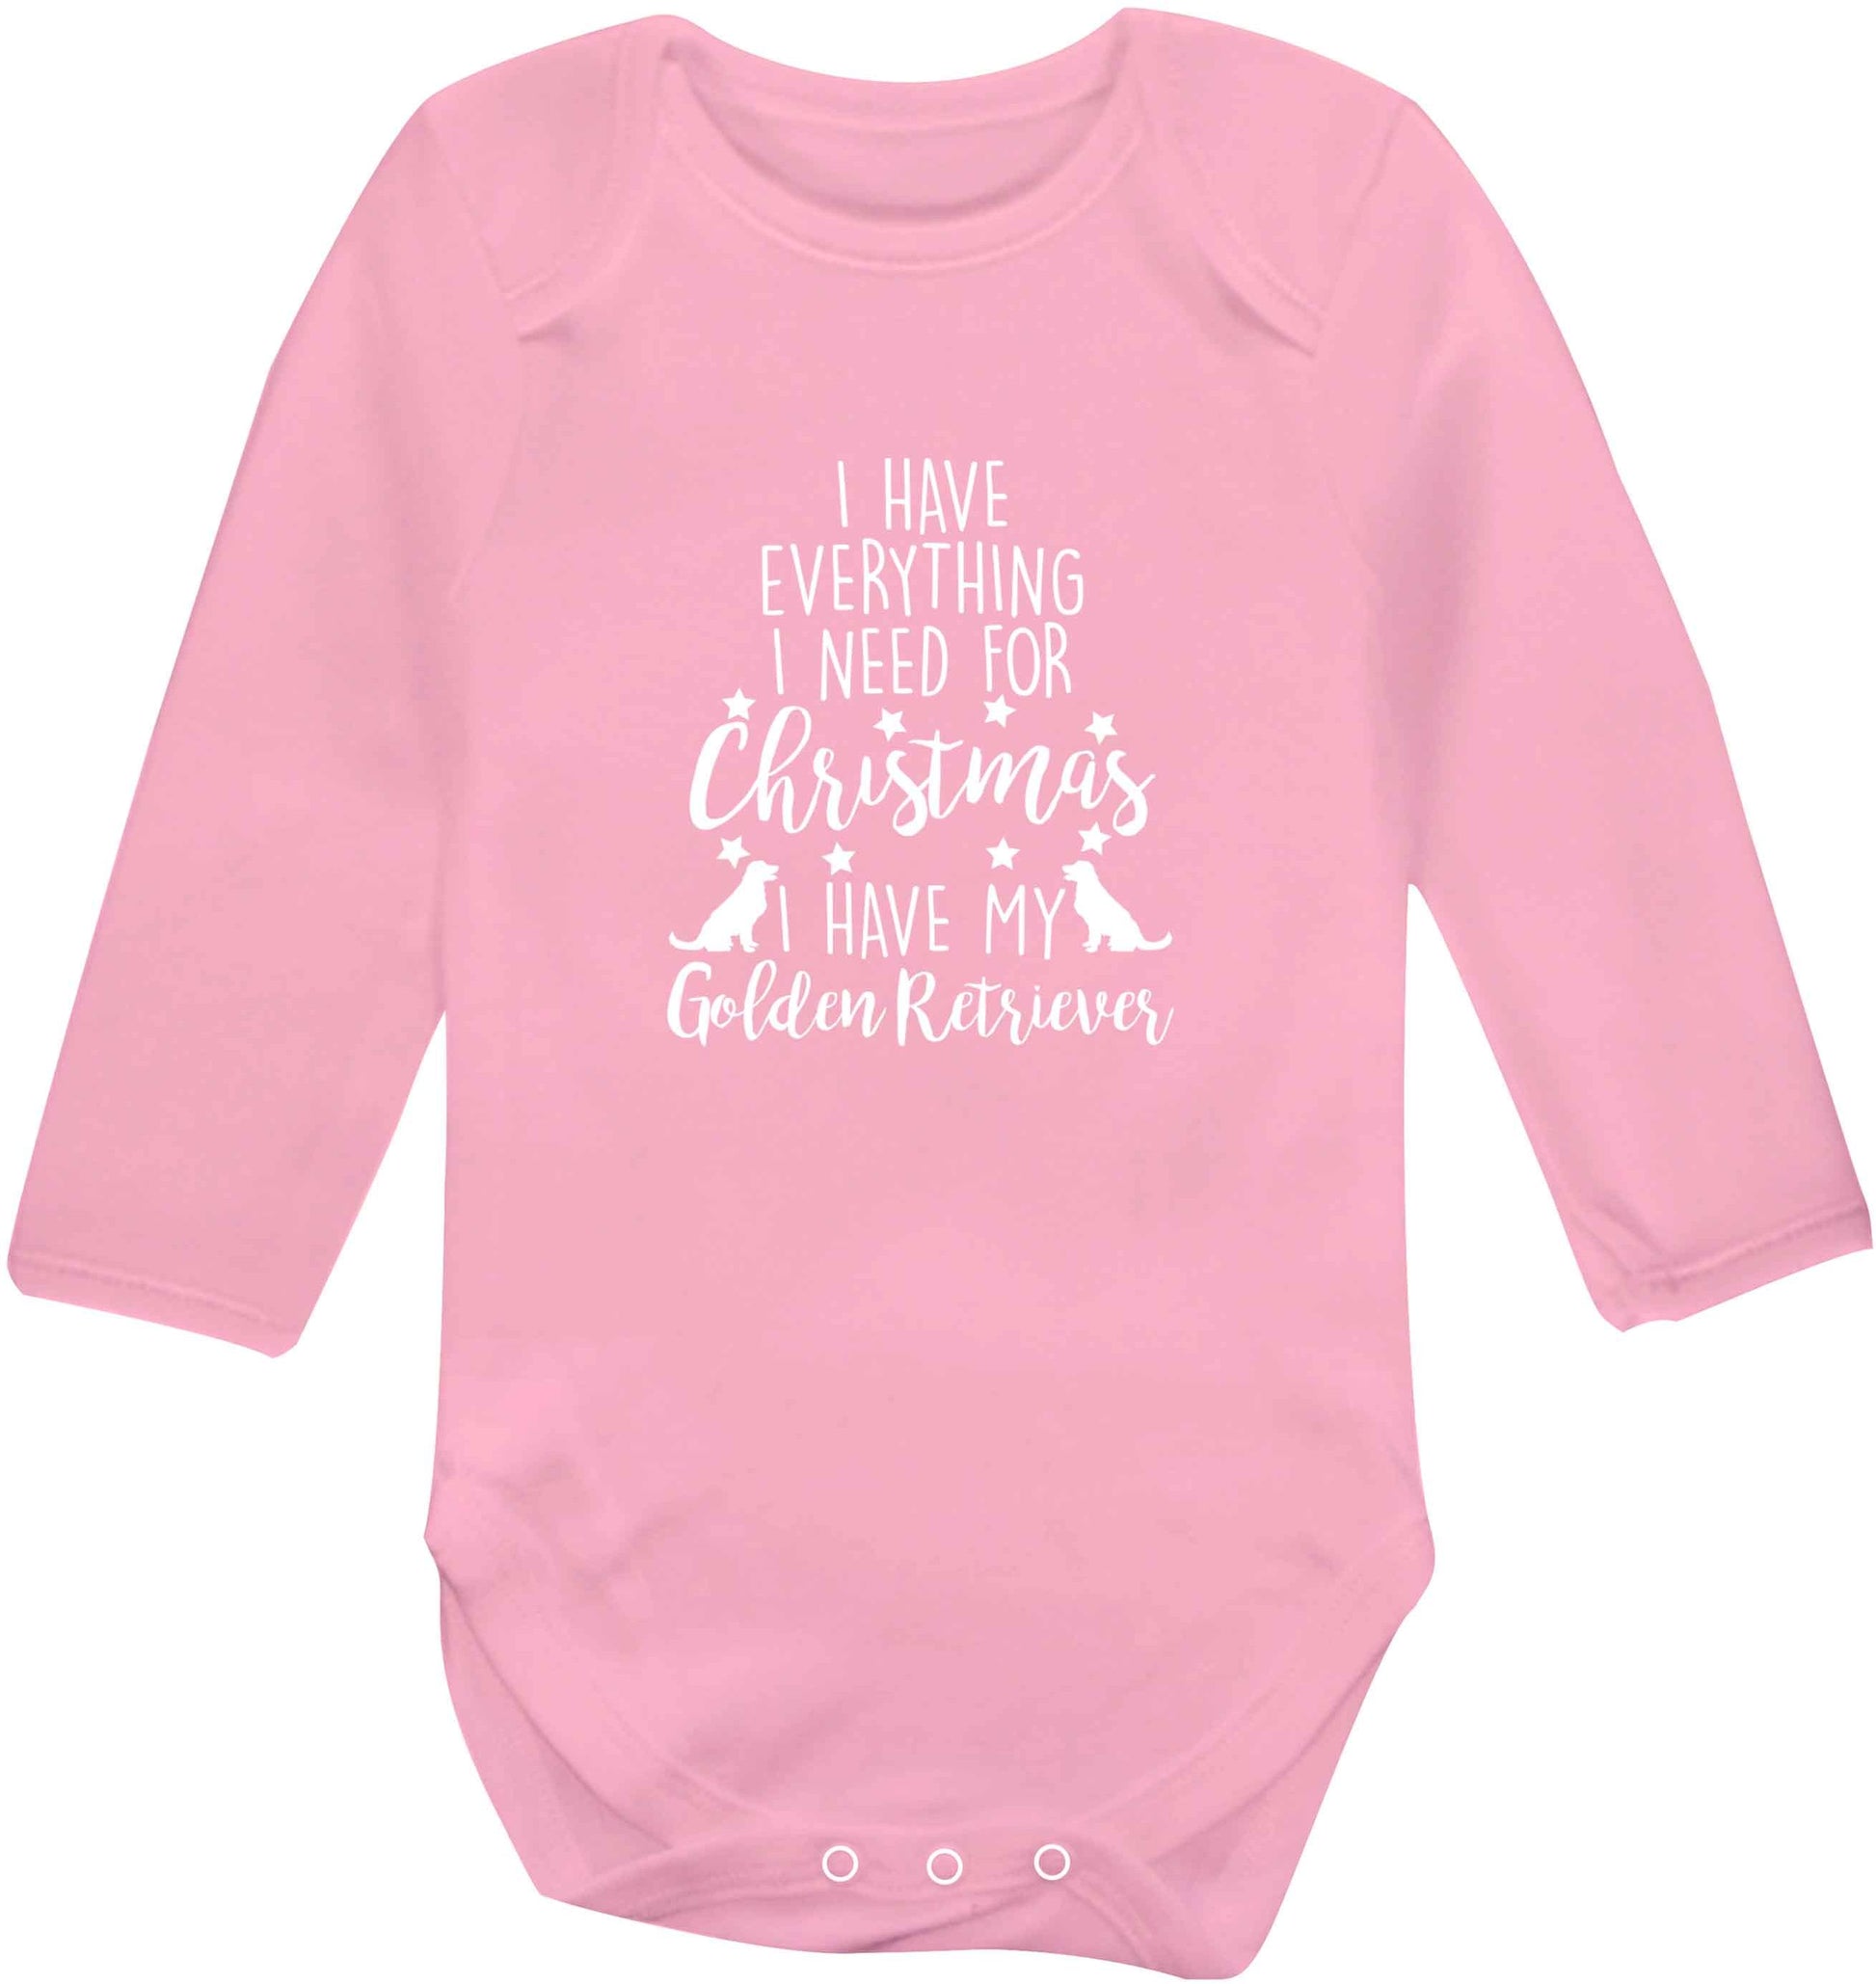 I have everything I need for Christmas I have my golden retriever baby vest long sleeved pale pink 6-12 months